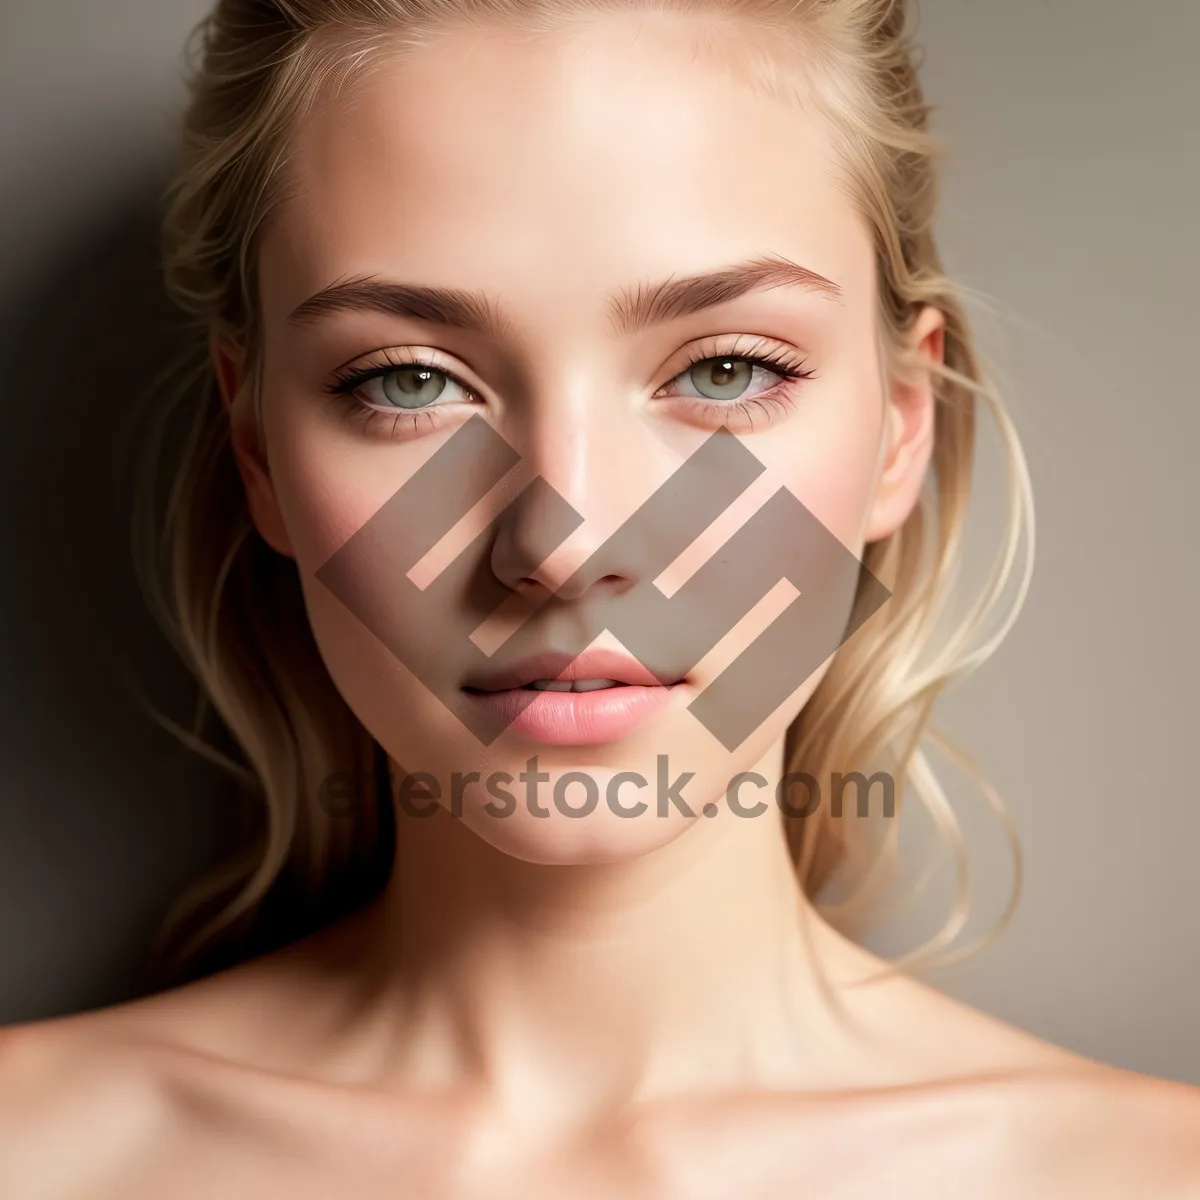 Picture of Glowing Beauty: Attractive Model with Healthy Skin